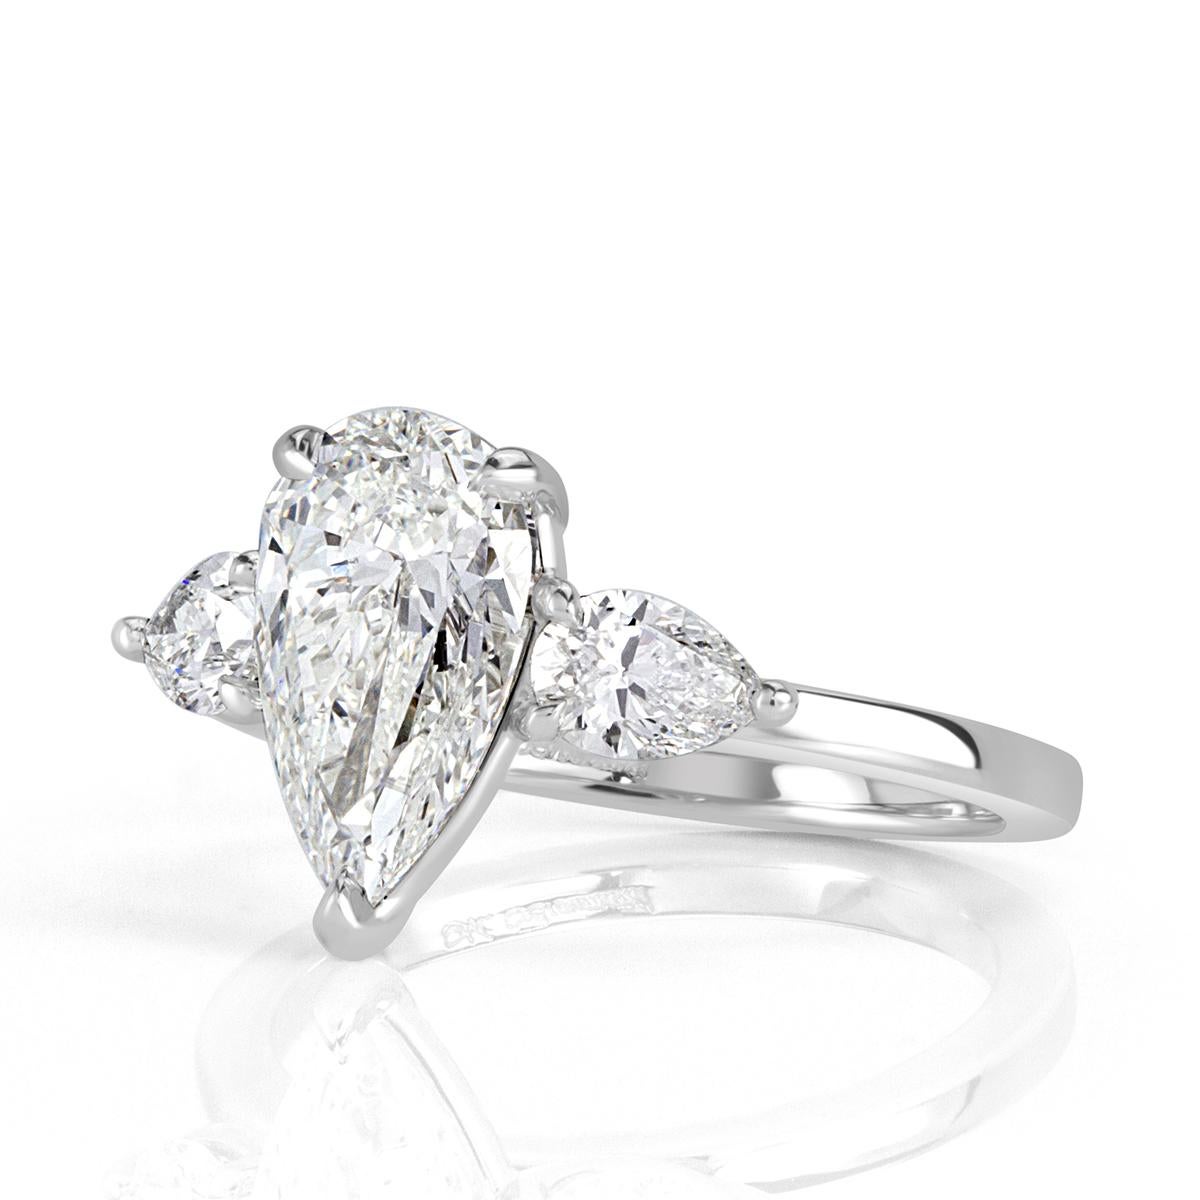 This superb diamond engagement ring showcases a gorgeous three-stone design of pear shaped diamonds with the stunning 2.02ct center diamond being GIA certified at G-SI1. It is peerless white and perfectly eye clean with amazing measurements of 11.56